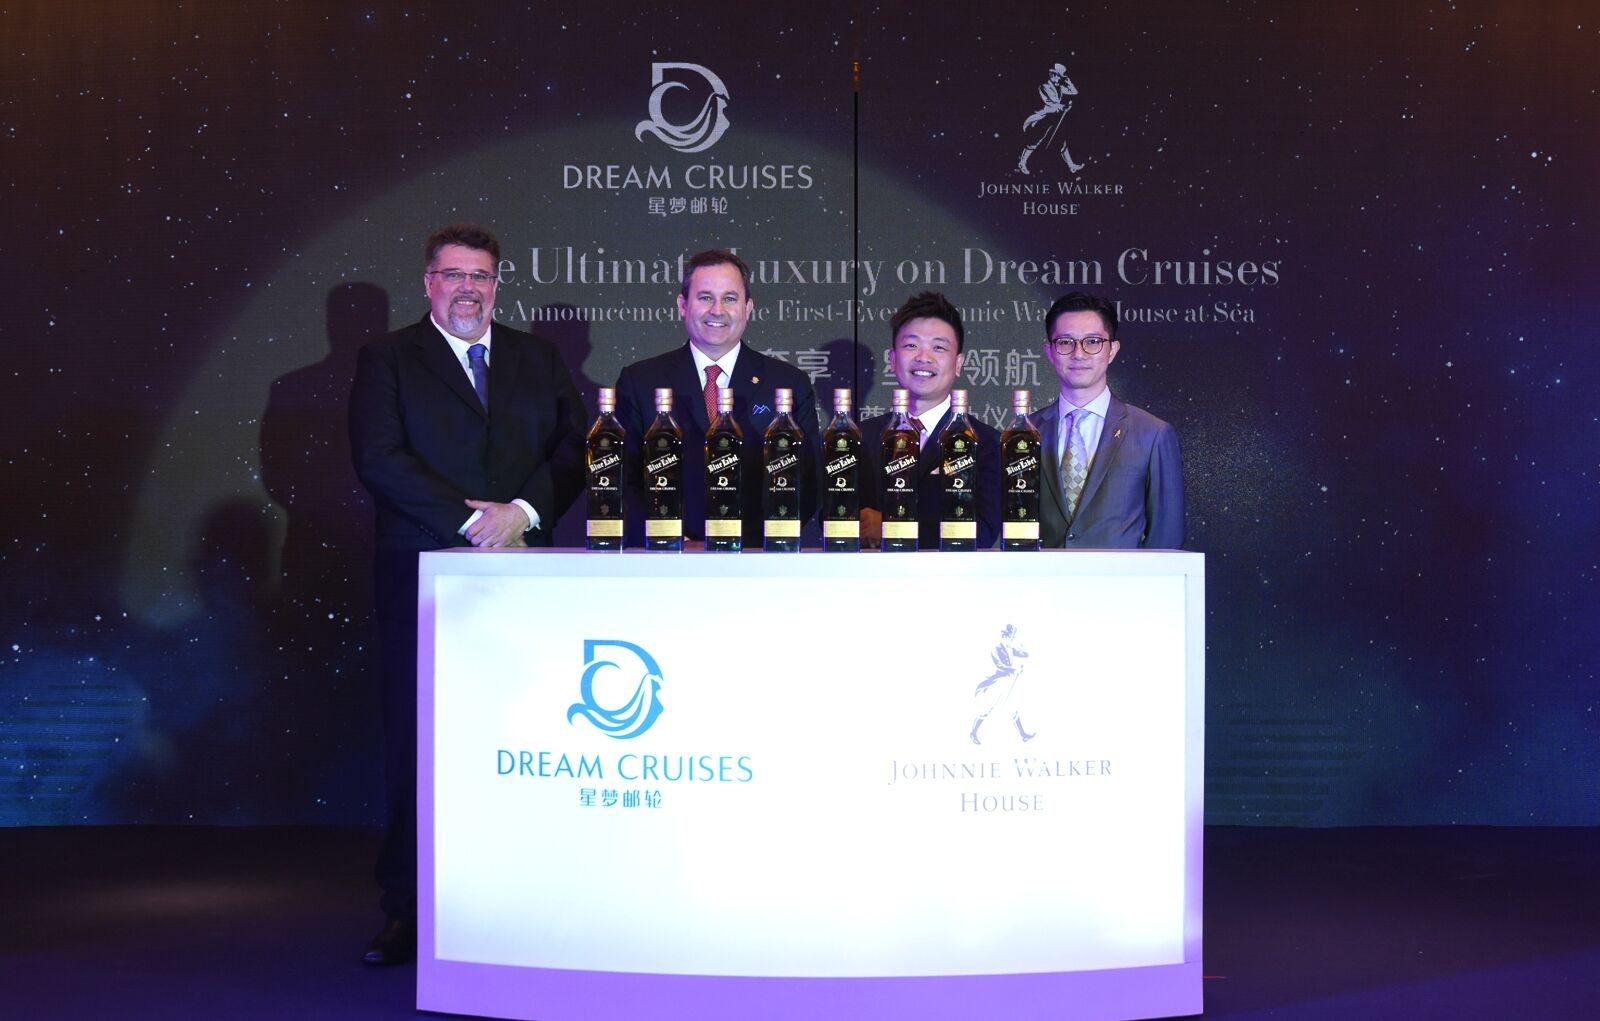 The launch event for the Johnnie Walker House and Genting partnership. From left to right are Mark Woodcock, Vice President, Food & Beverage, Hotel Operations, Dream Cruises; Thatcher Brown, President of Dream Cruises; Lawrence Law, Global Director, Johnnie Walker House Super Deluxe Luxury Portfolio, and Andre Chong, Global Head of Johnnie Walker House. (Courtesy Photo)